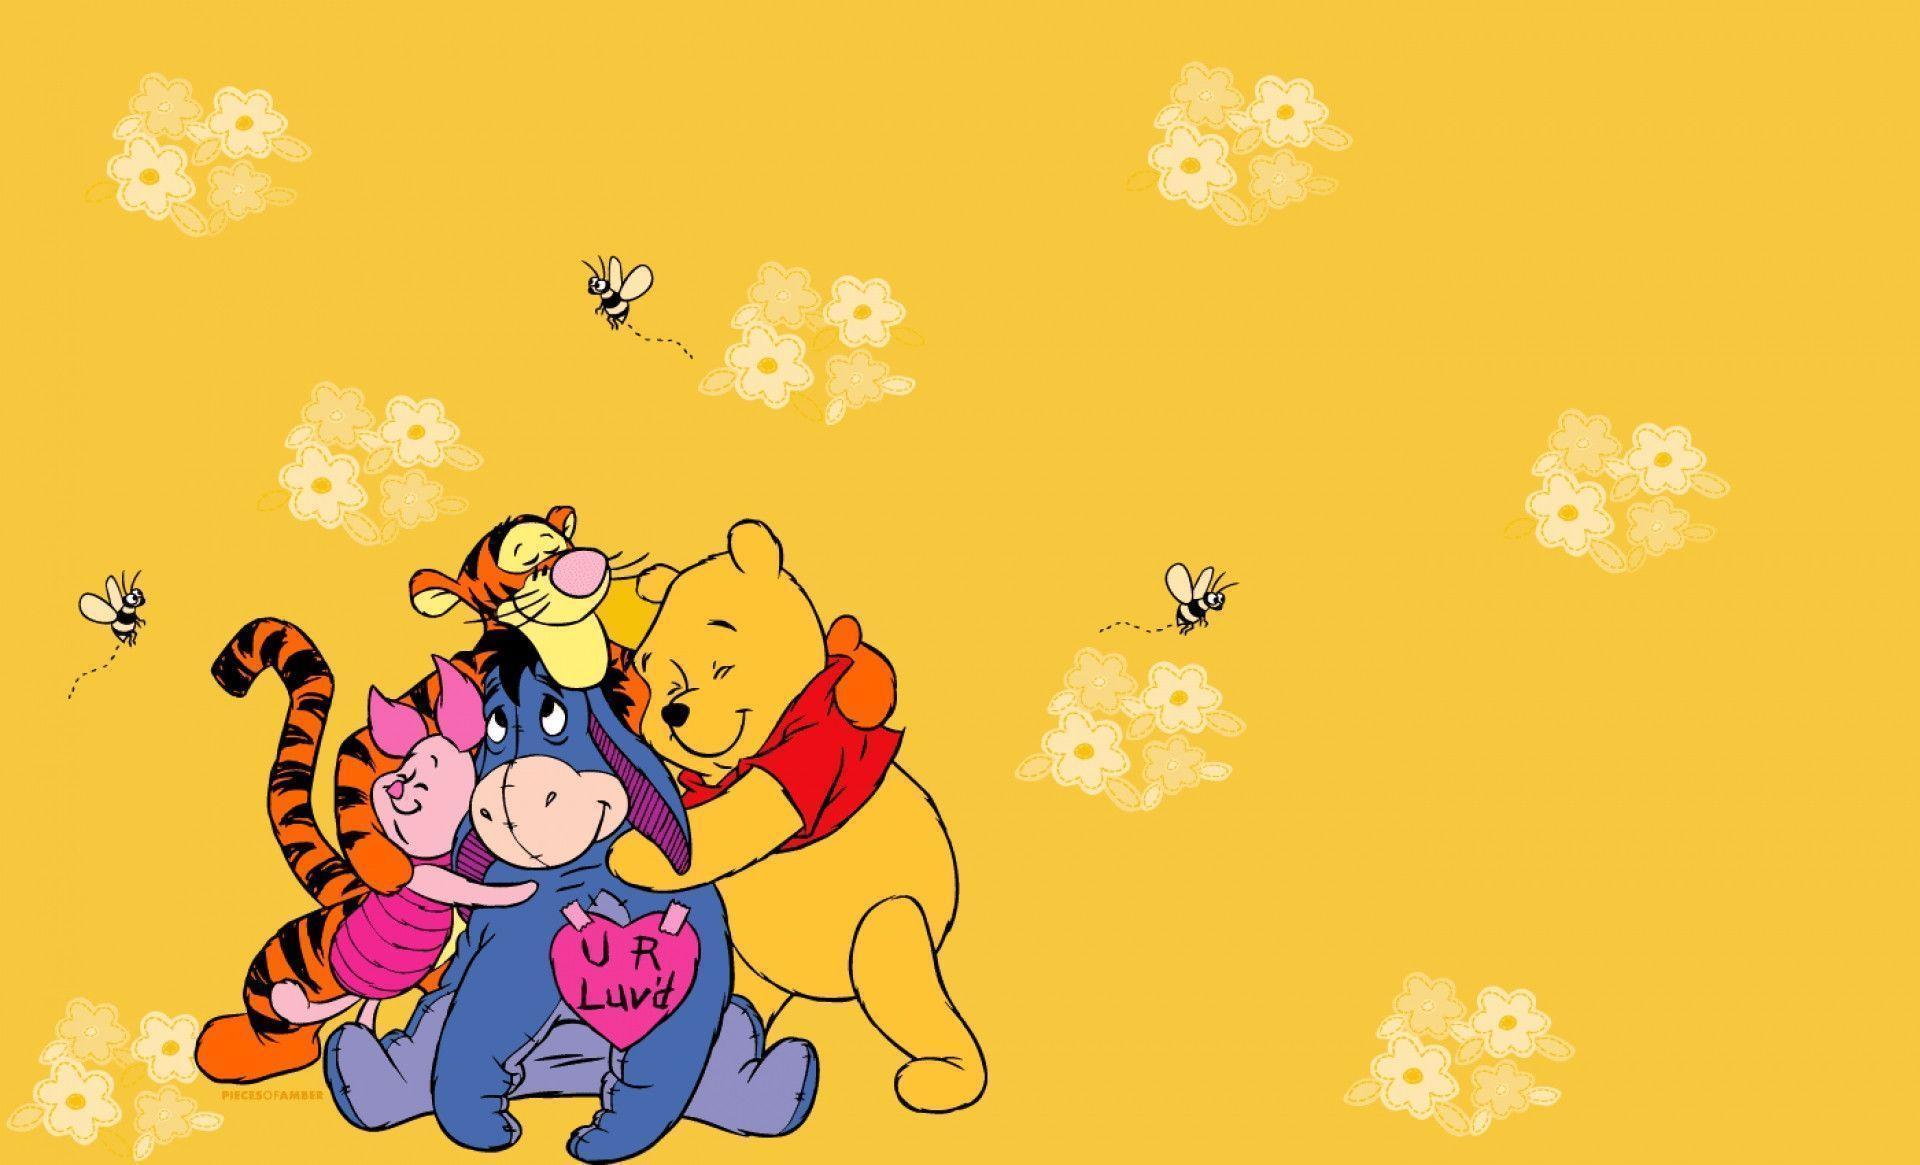 Backgrounds cartoons 1 winnie the pooh.